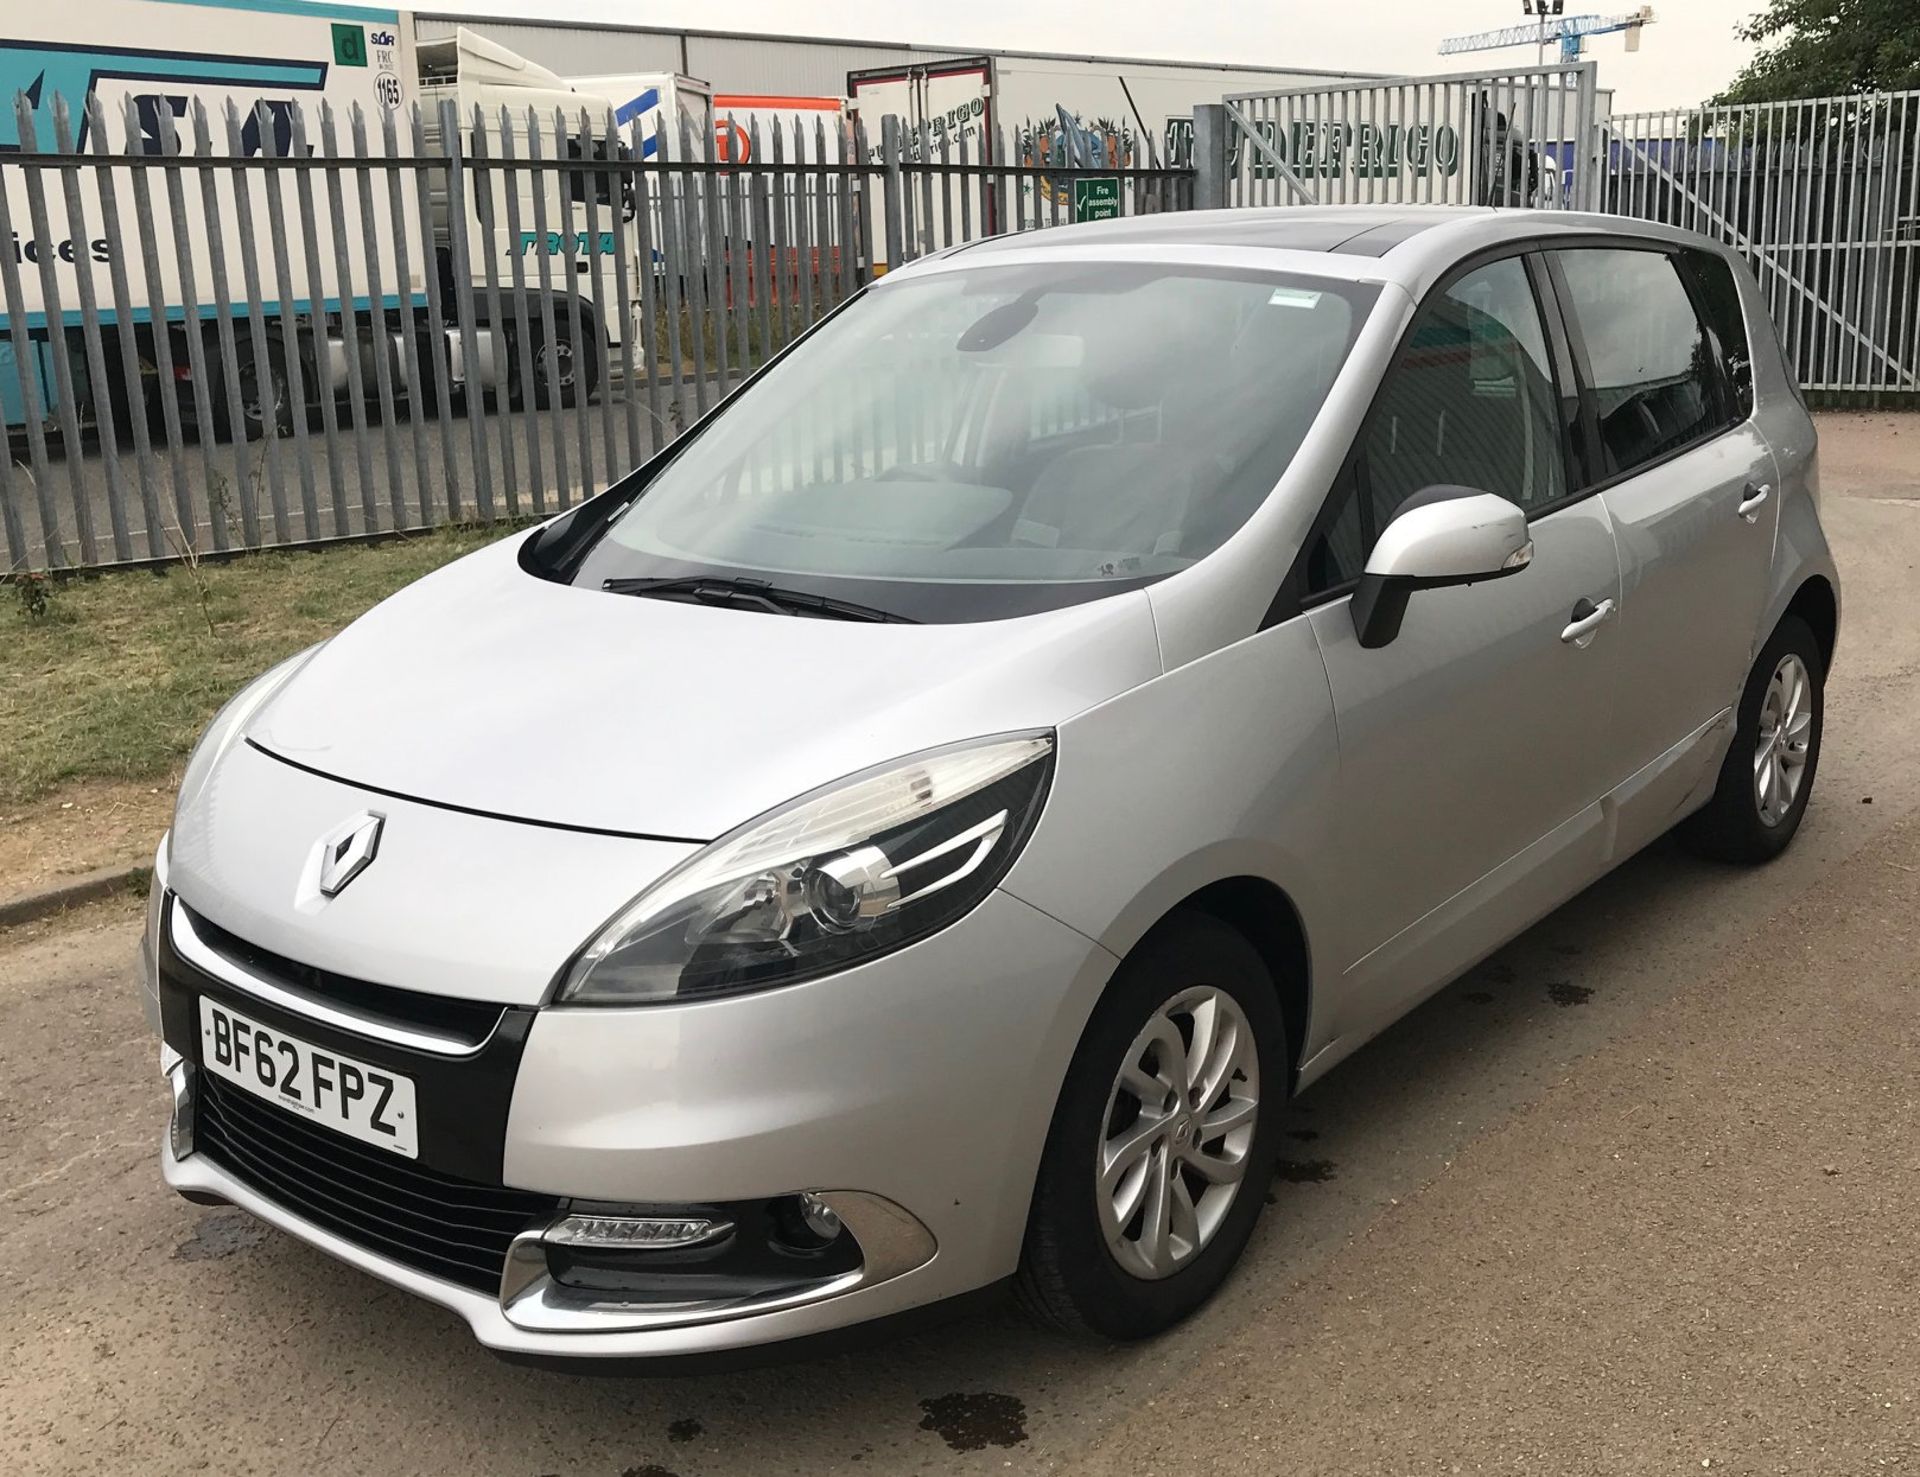 2012 Renault Scenic 1.5 Dci D-Que Tt Energy 5 Dr MPV - CL505 - NO VAT ON THE HAMMER - Location: Corb - Image 4 of 15